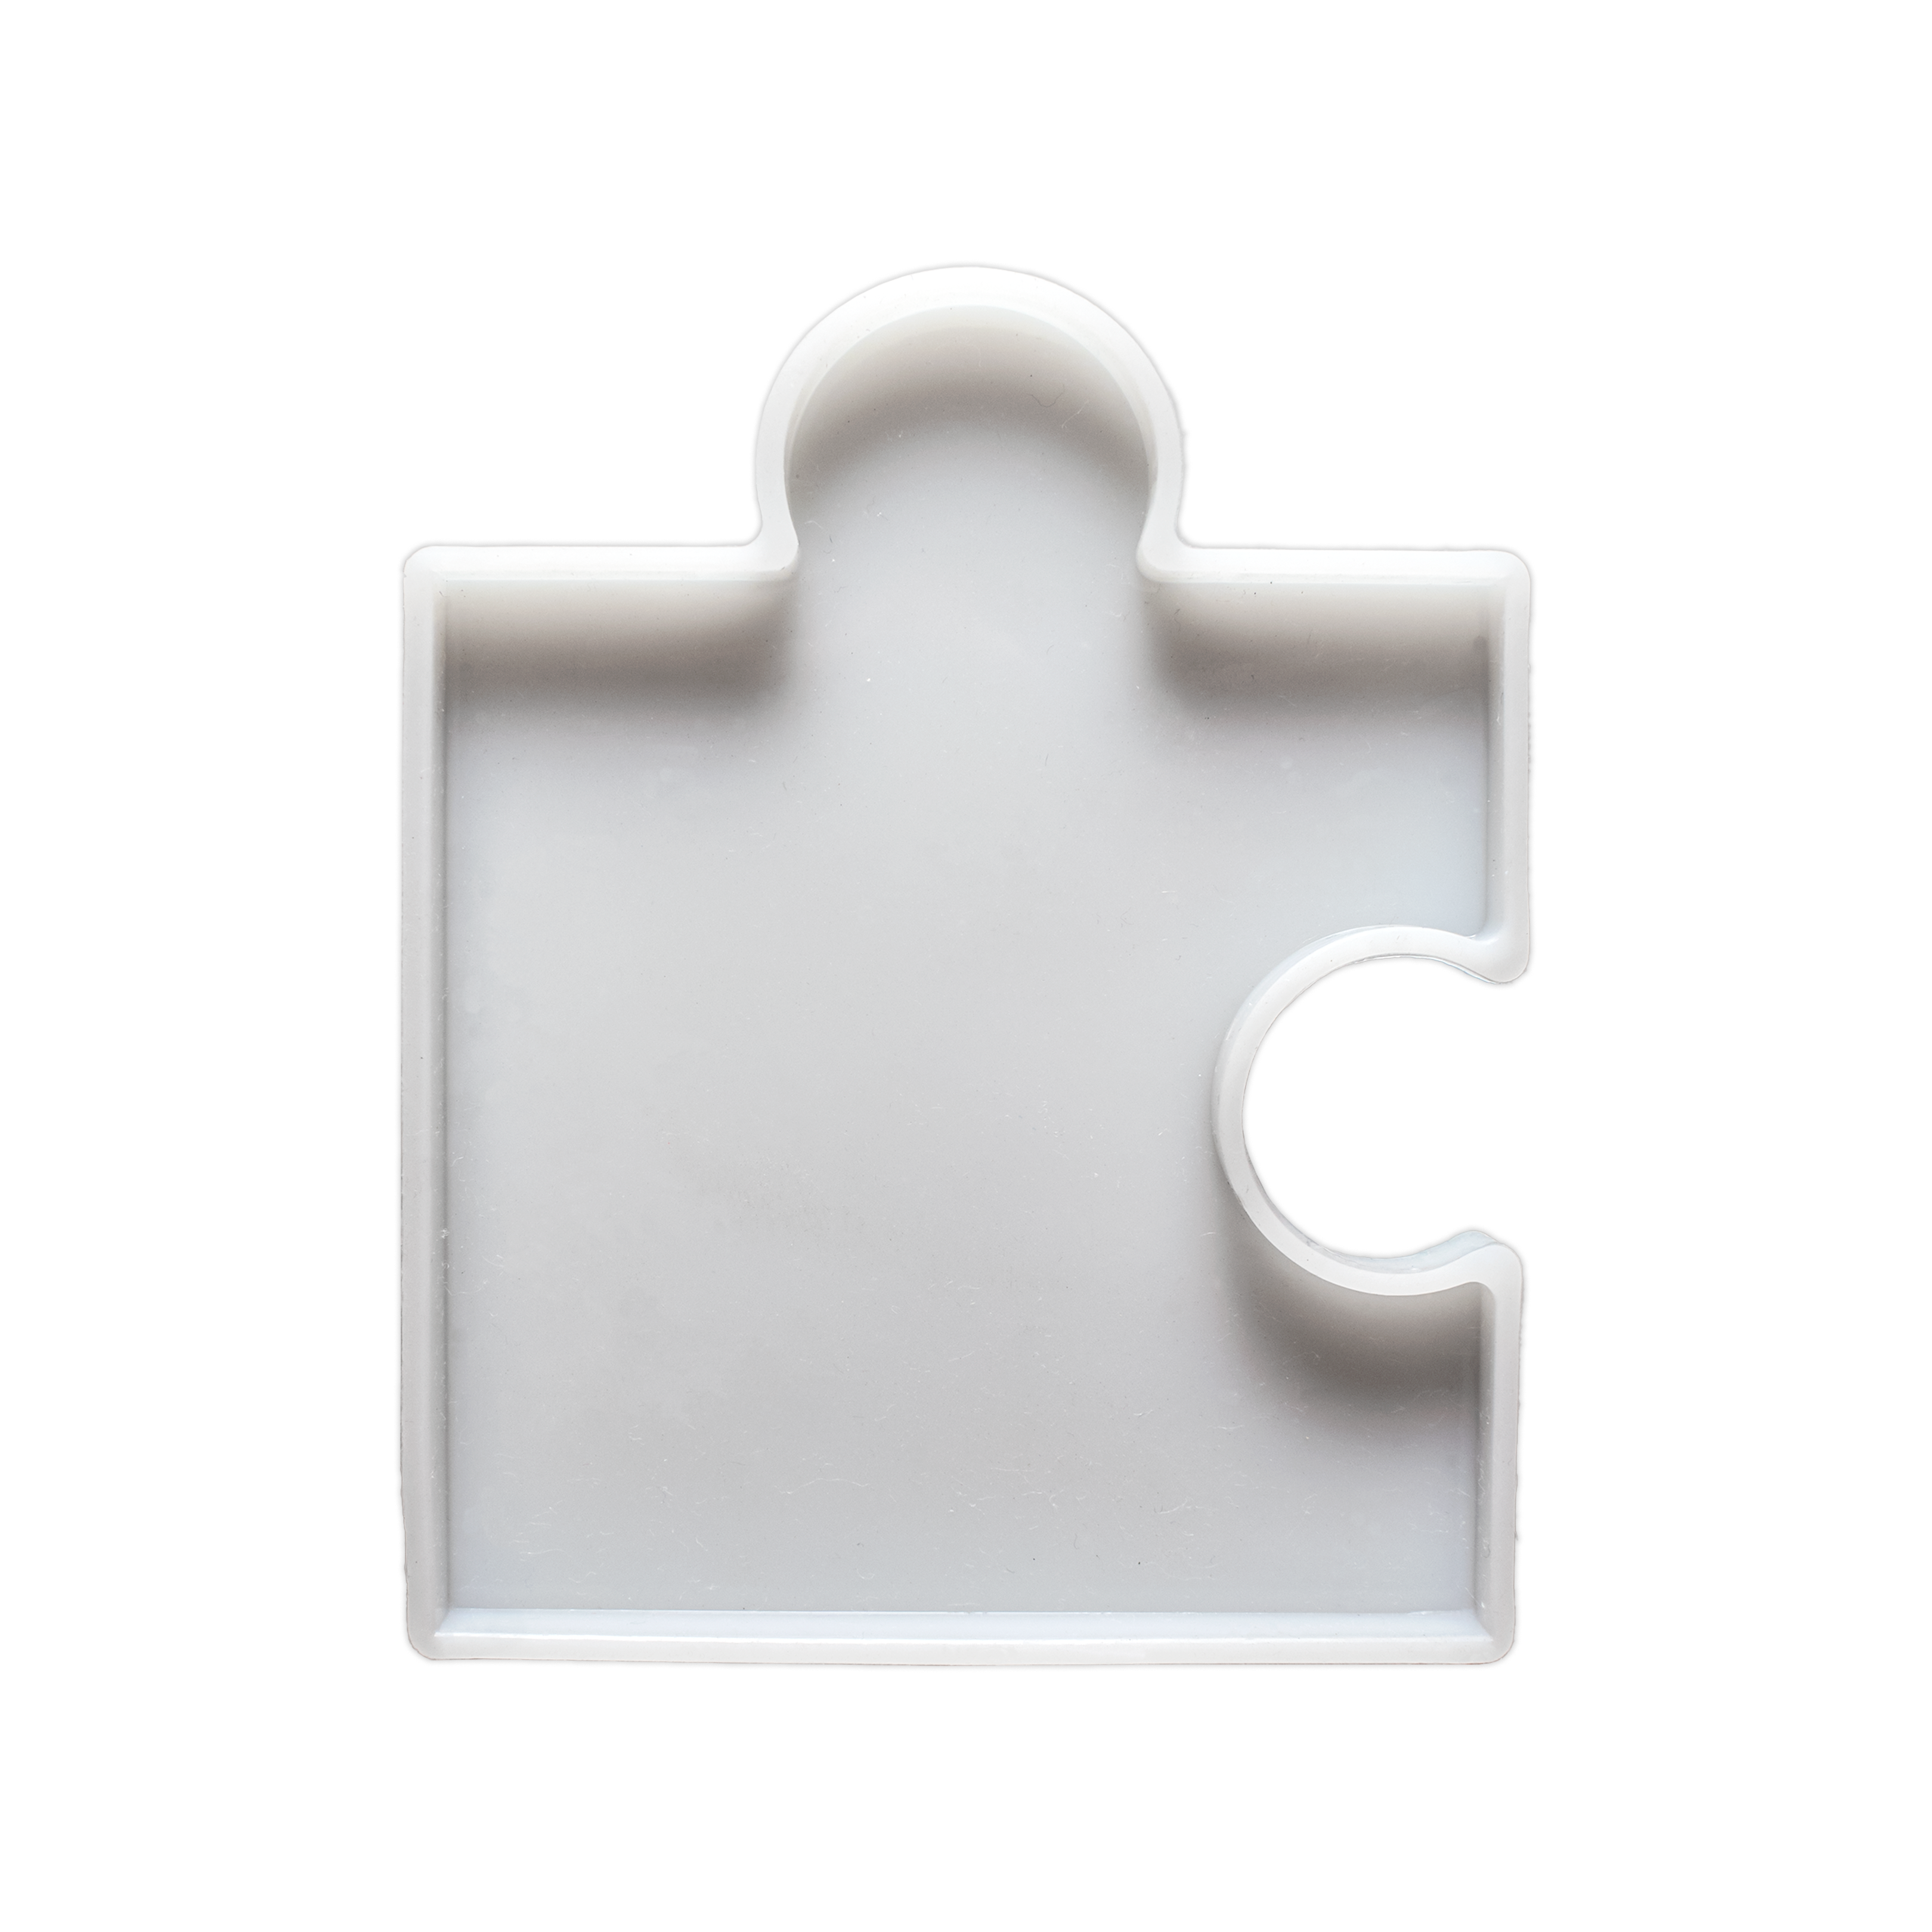 Silicone Mould Jigsaw Puzzle Pieces L4.75 X W3.65inch Approx 1pc